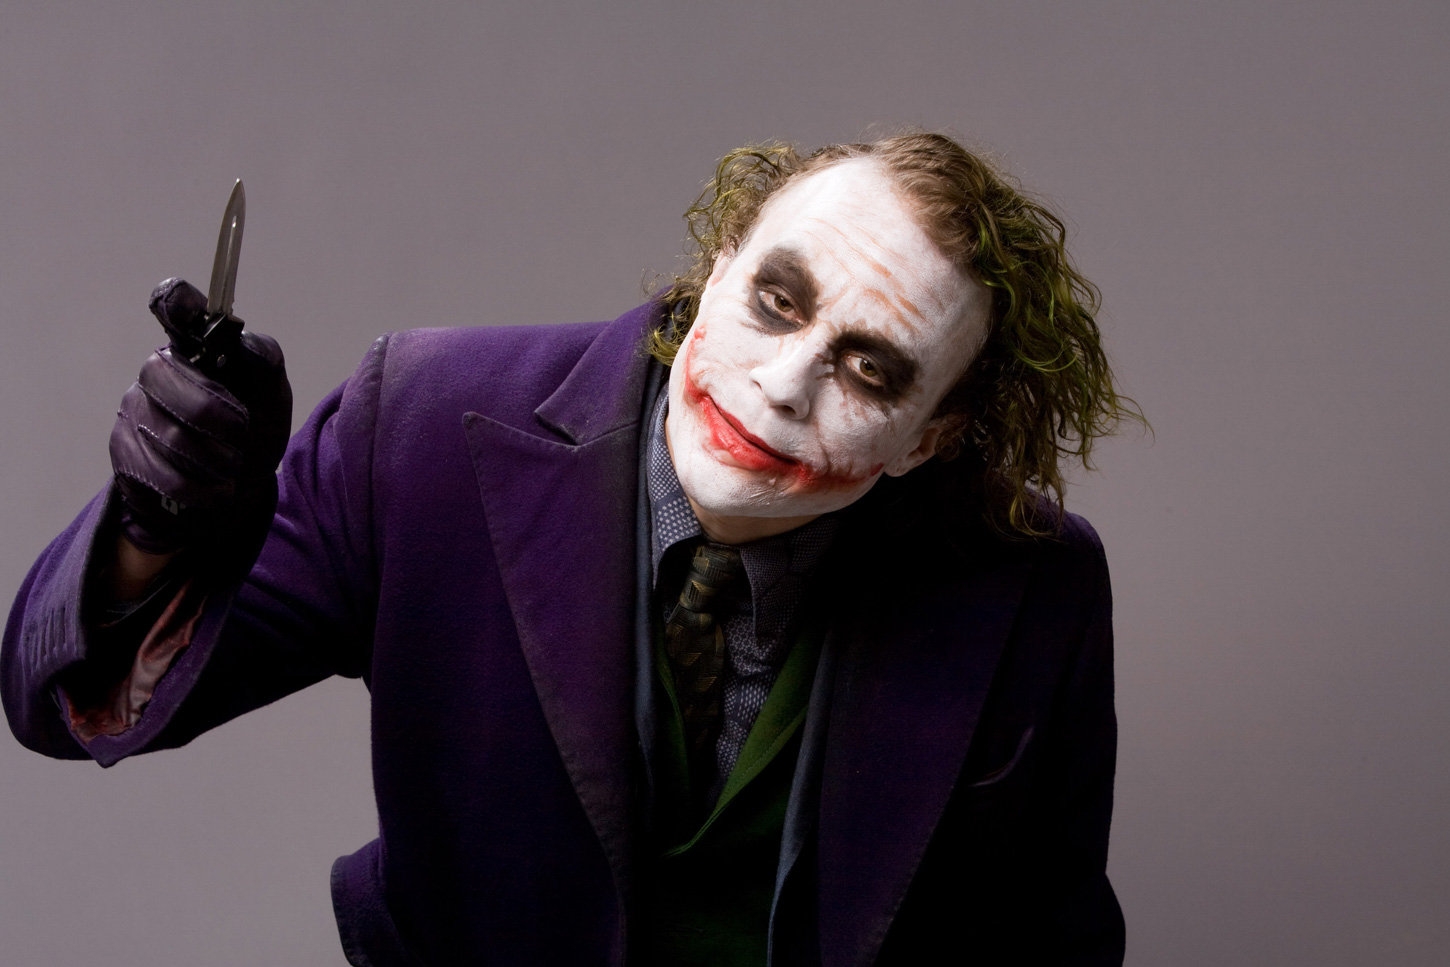 Heath Ledger's sister says he had plans to play The Joker again after  'The Dark Knight